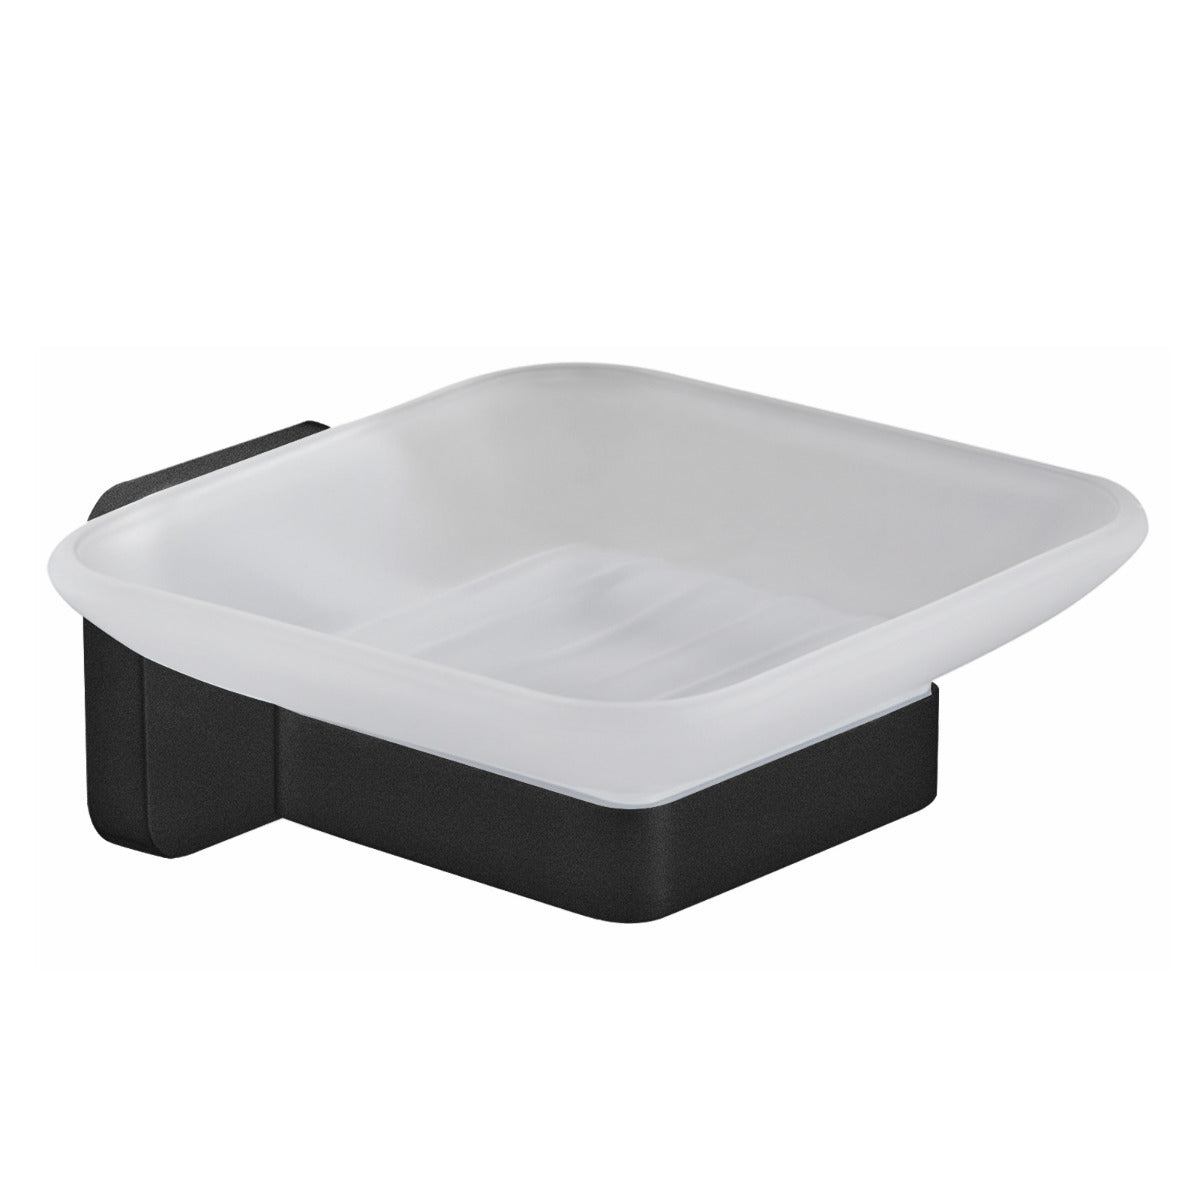 JassferryJASSFERRY Wall Mounted Soap Dish Holder Black Square Tray Frosted Glass SoapSoap Dishes